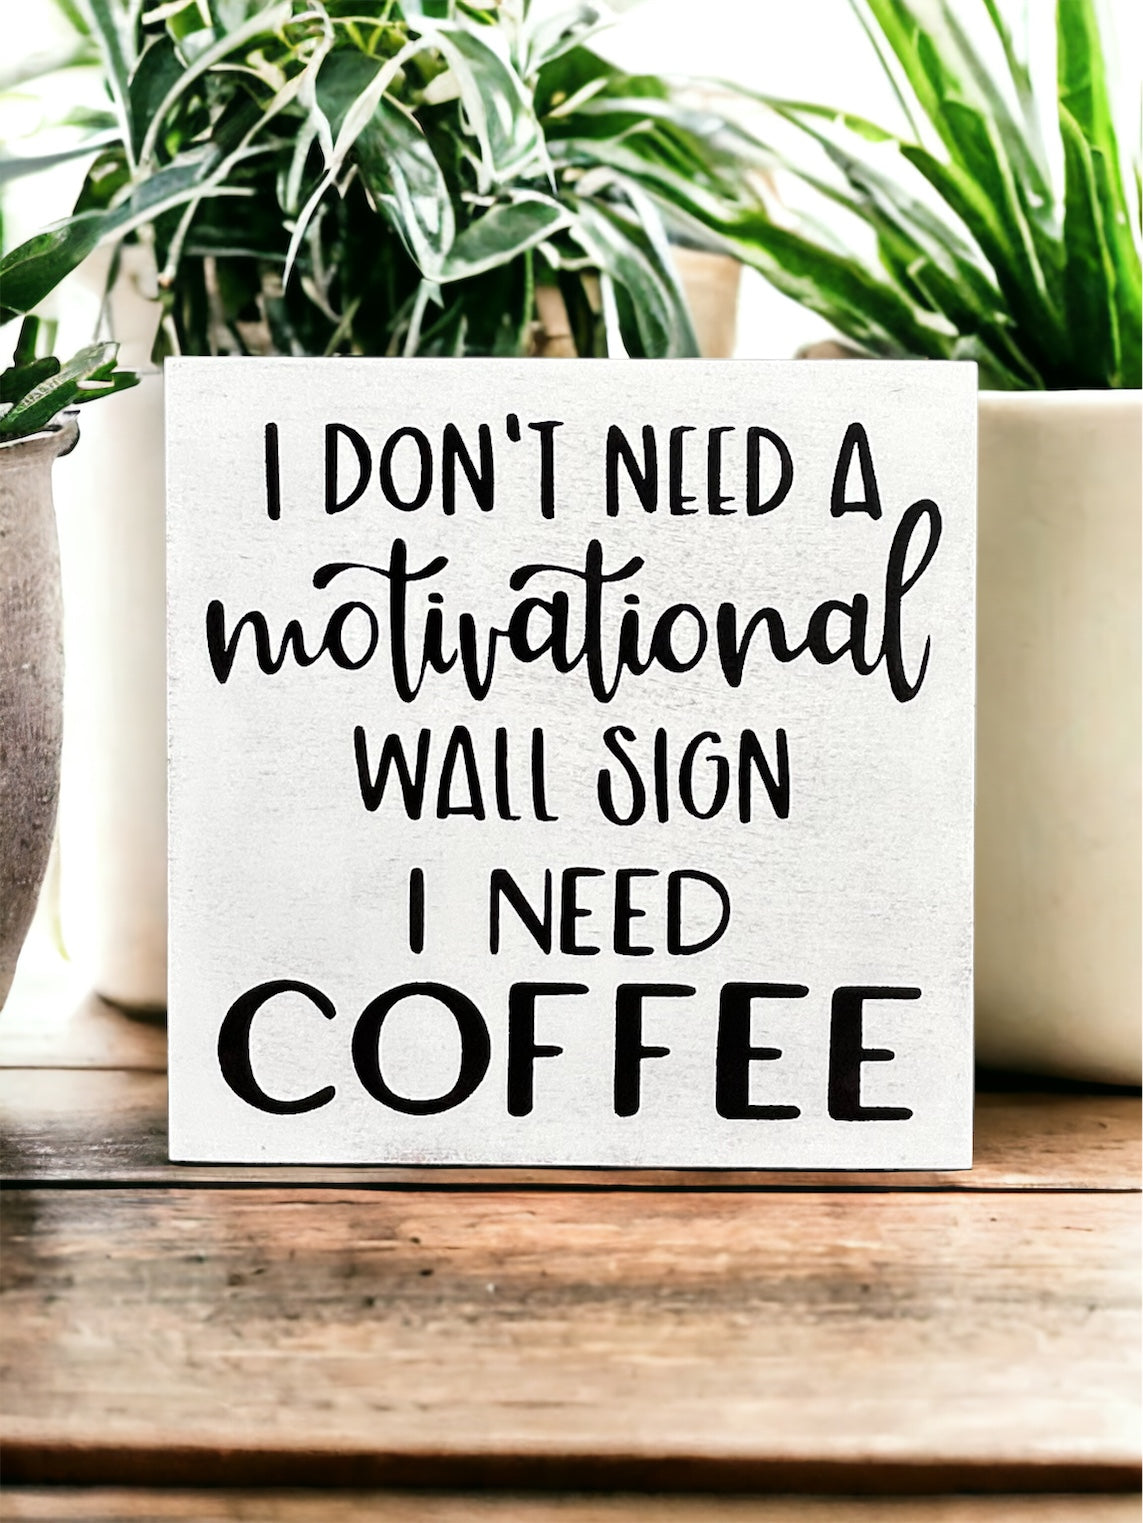 Funny coffee wood sign